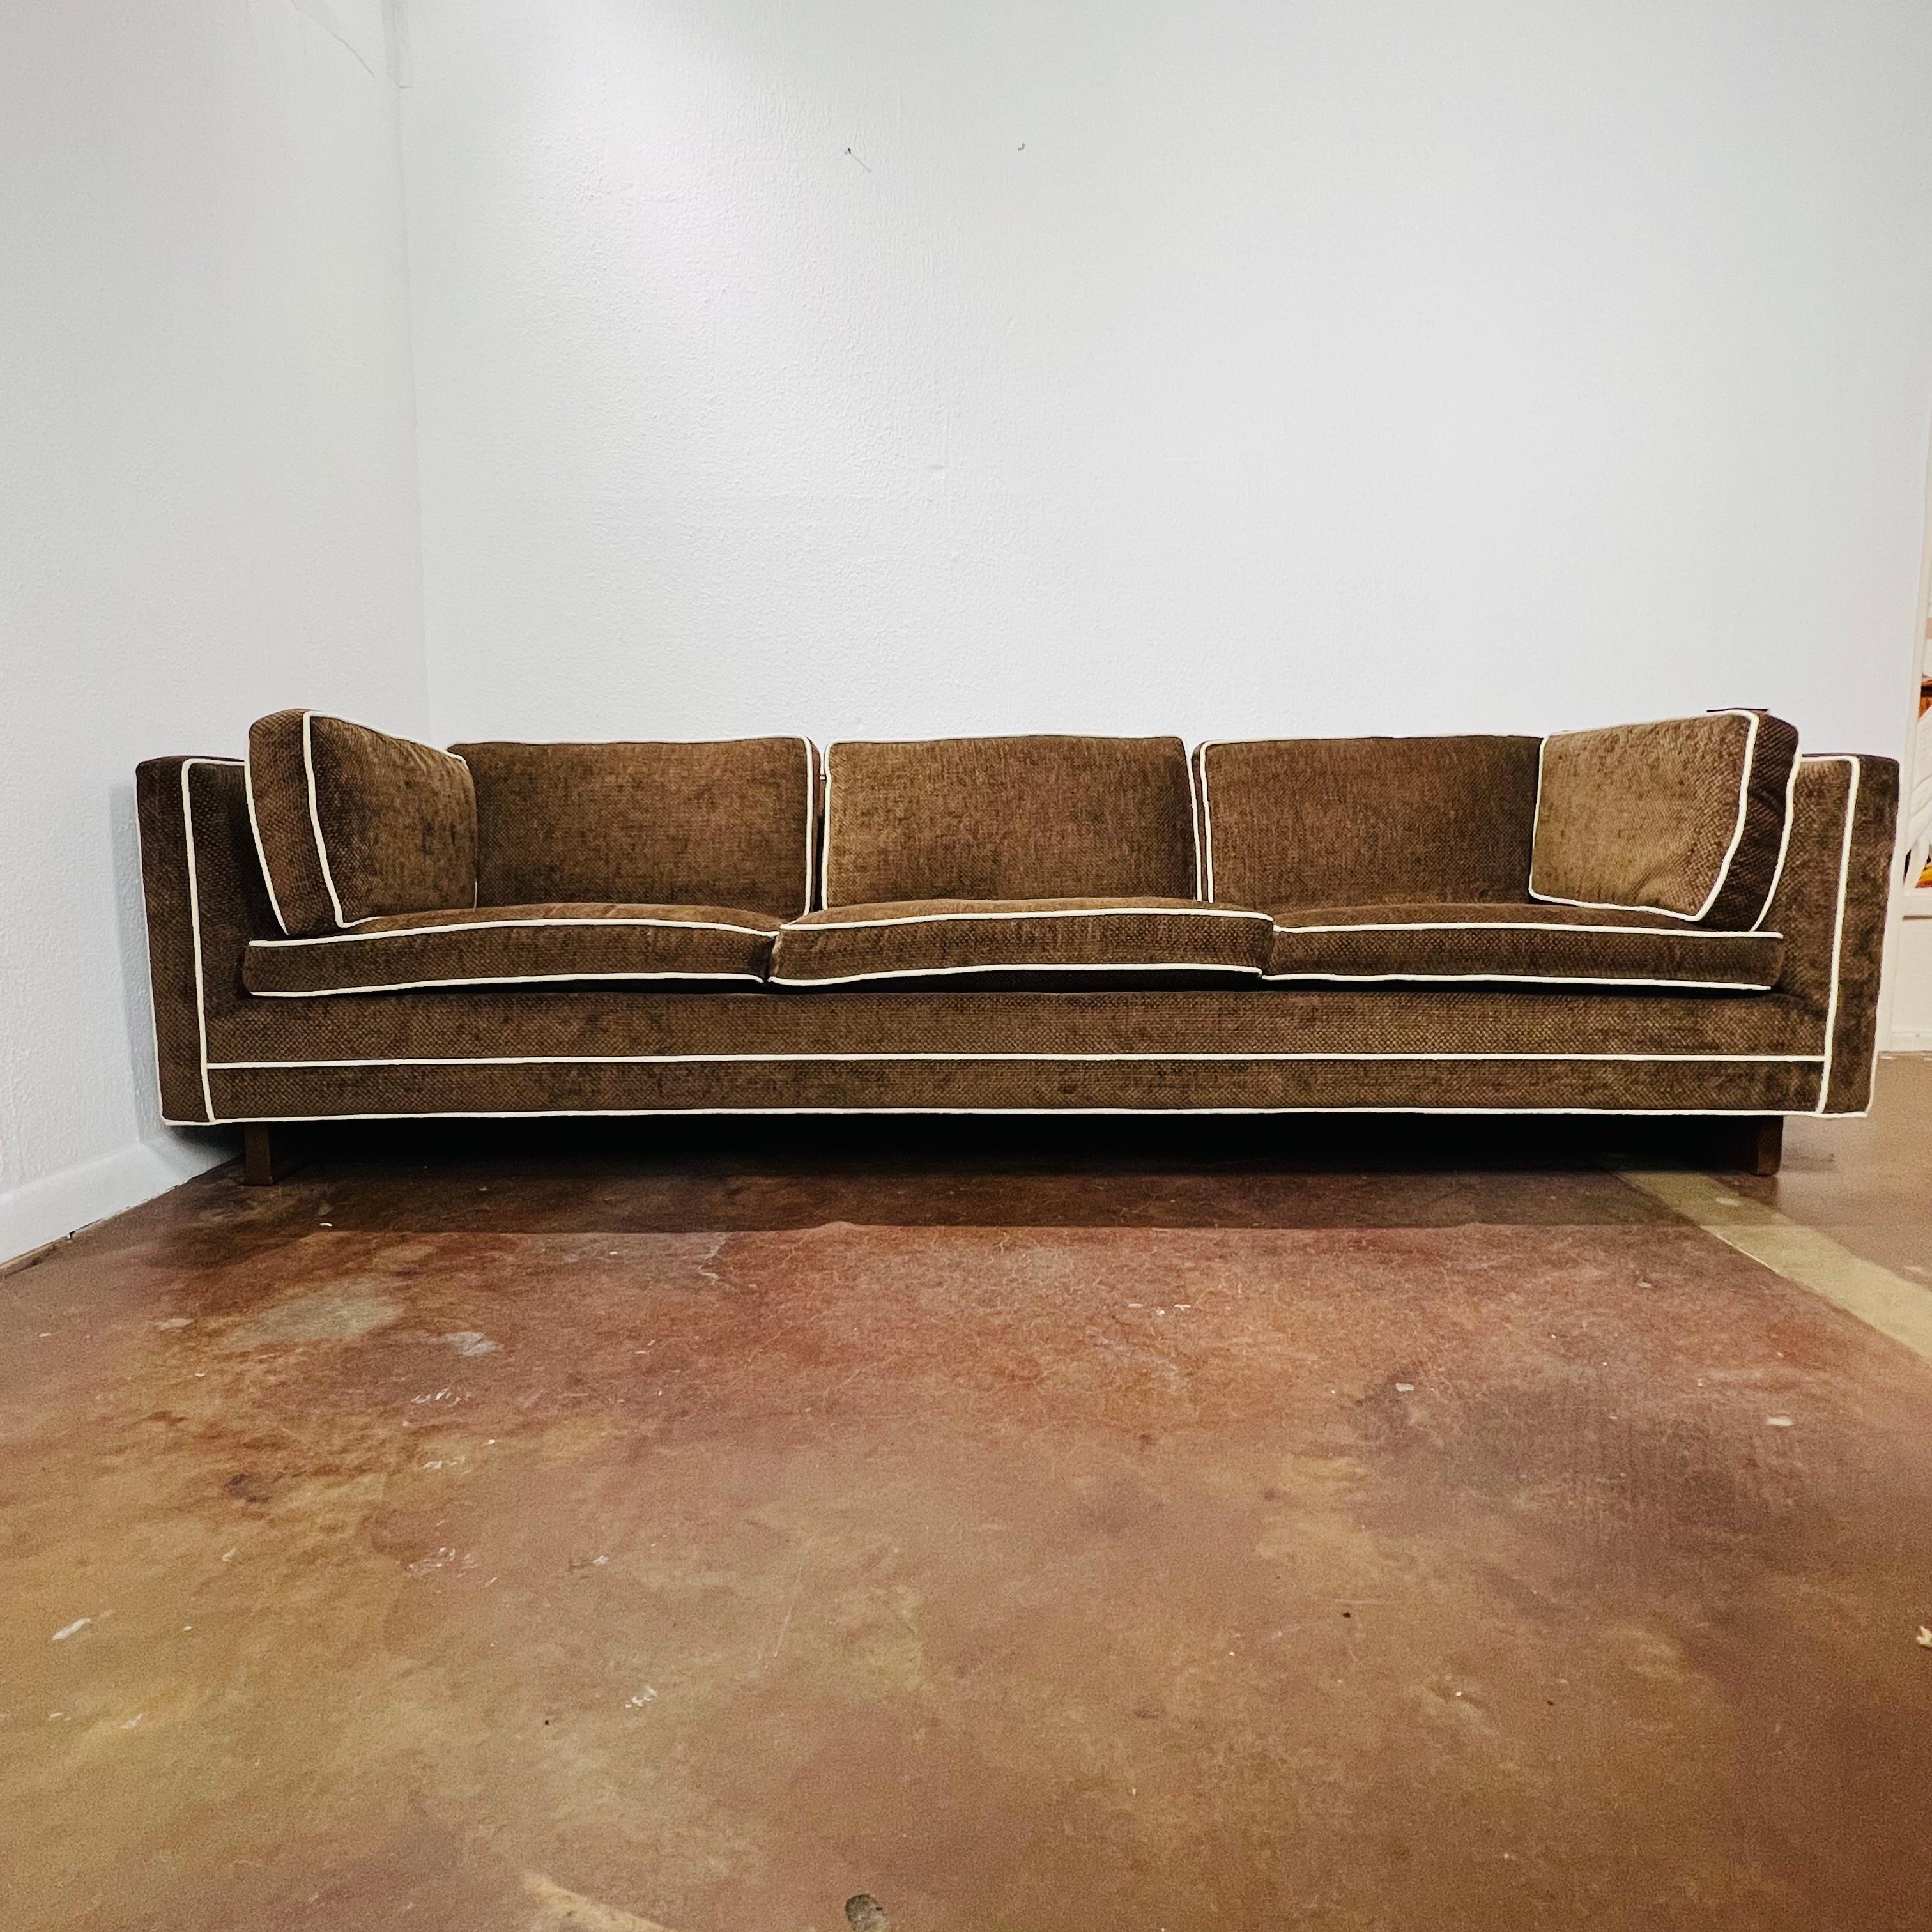 Vintage tuxedo sofa on double pedestal base. Loose seat and back cushions, straight arms and back, and deep comfortable seats. Original brown velvet upholstery; shows normal wear from age and use. Wood pedestal bases have some chips/dings/scratches.